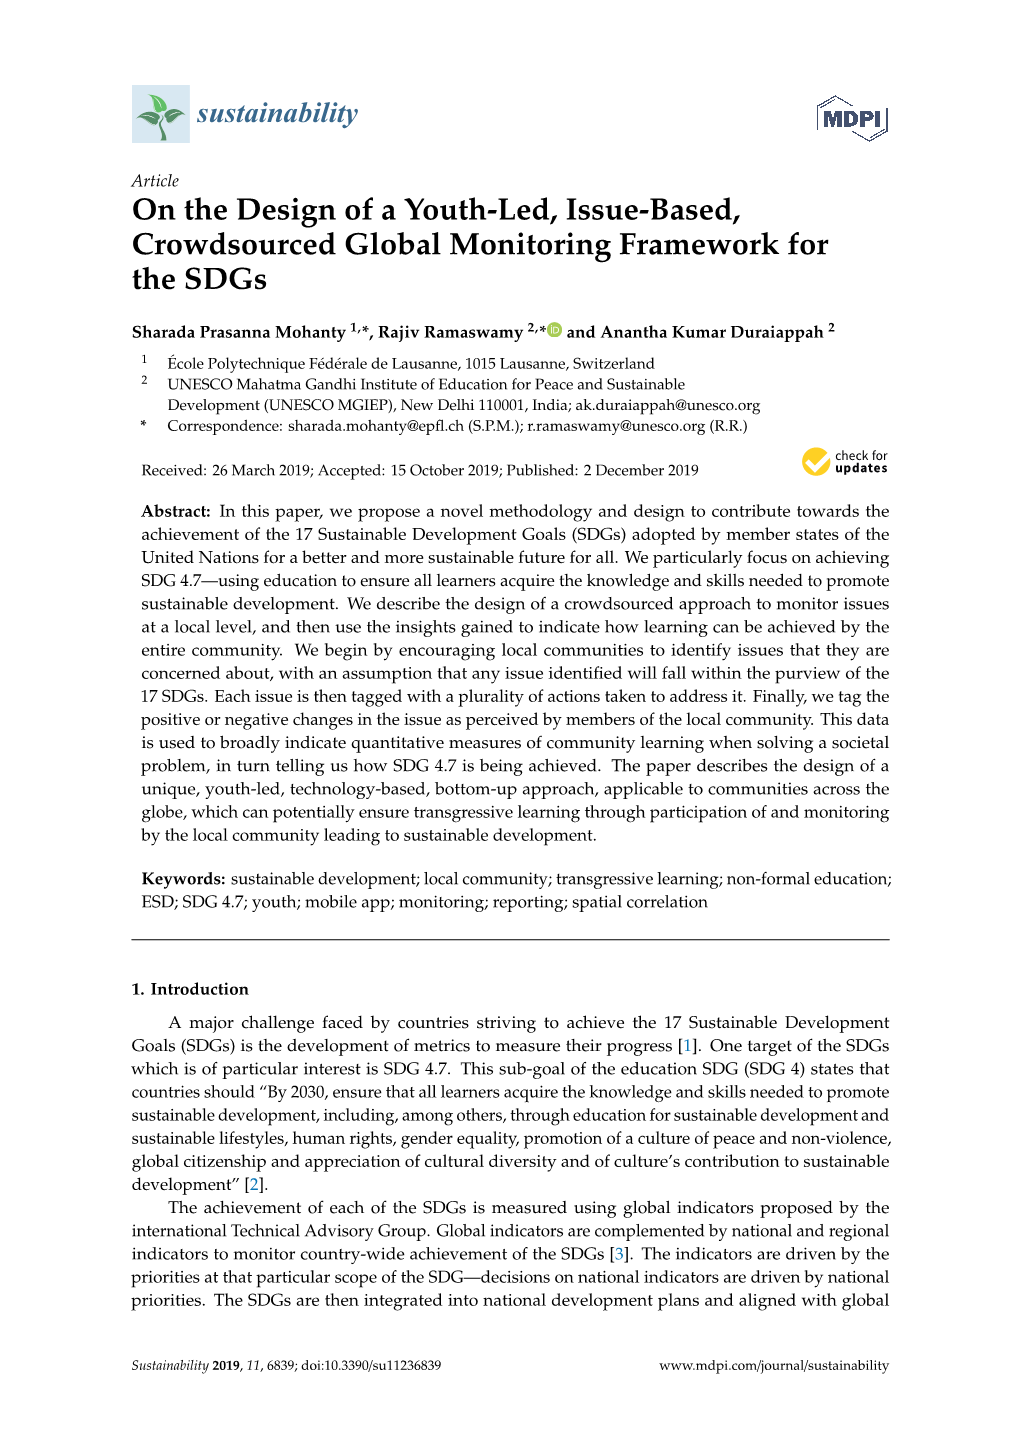 On the Design of a Youth-Led, Issue-Based, Crowdsourced Global Monitoring Framework for the Sdgs